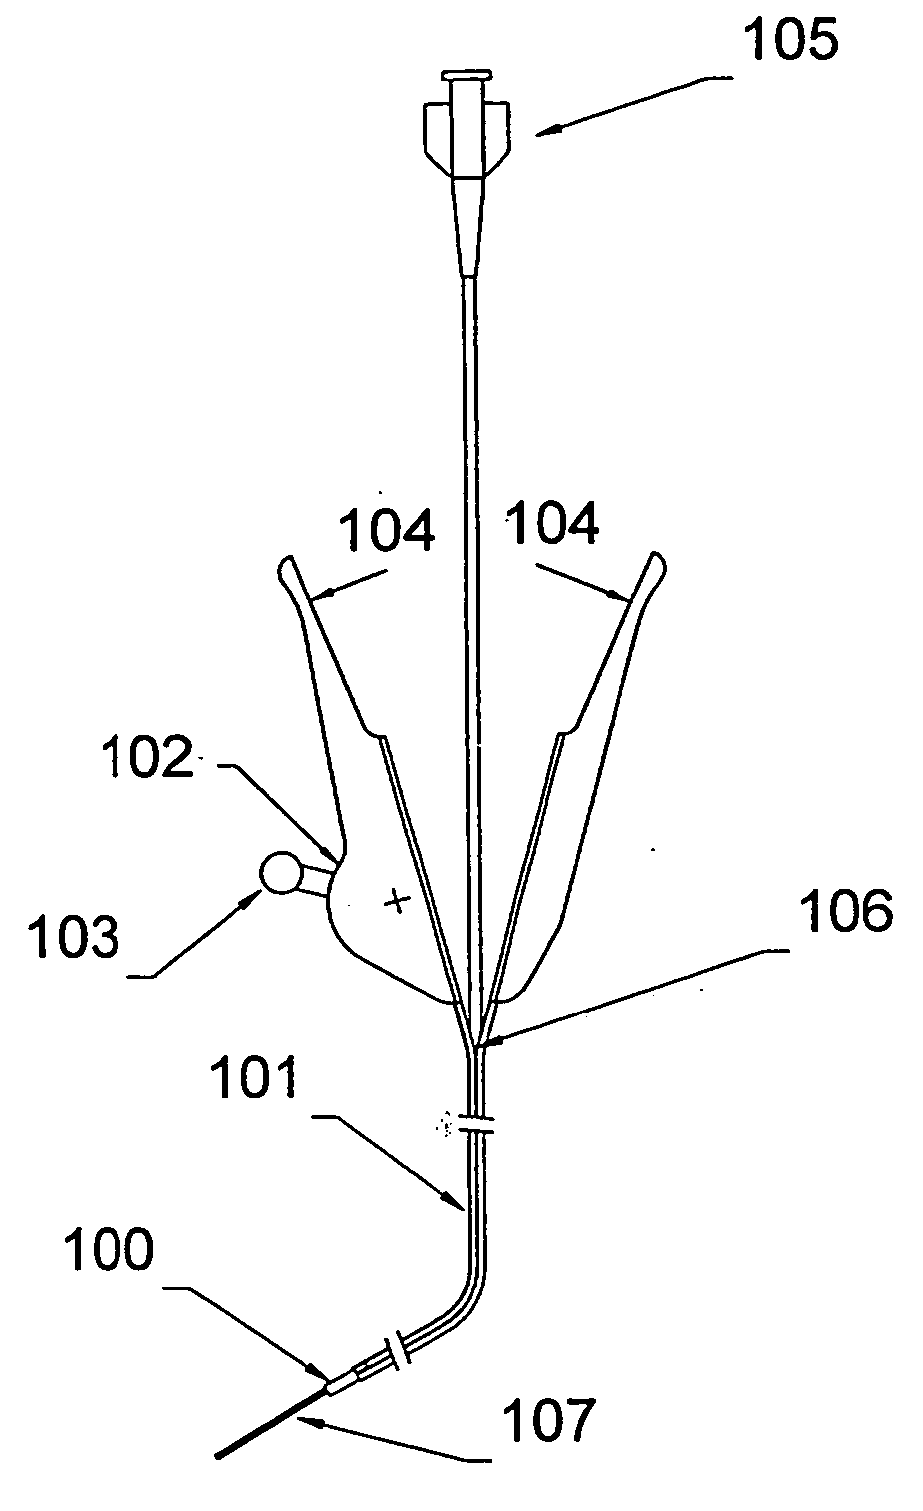 Methods of using a telescoping guide catheter with peel-away outer sheath